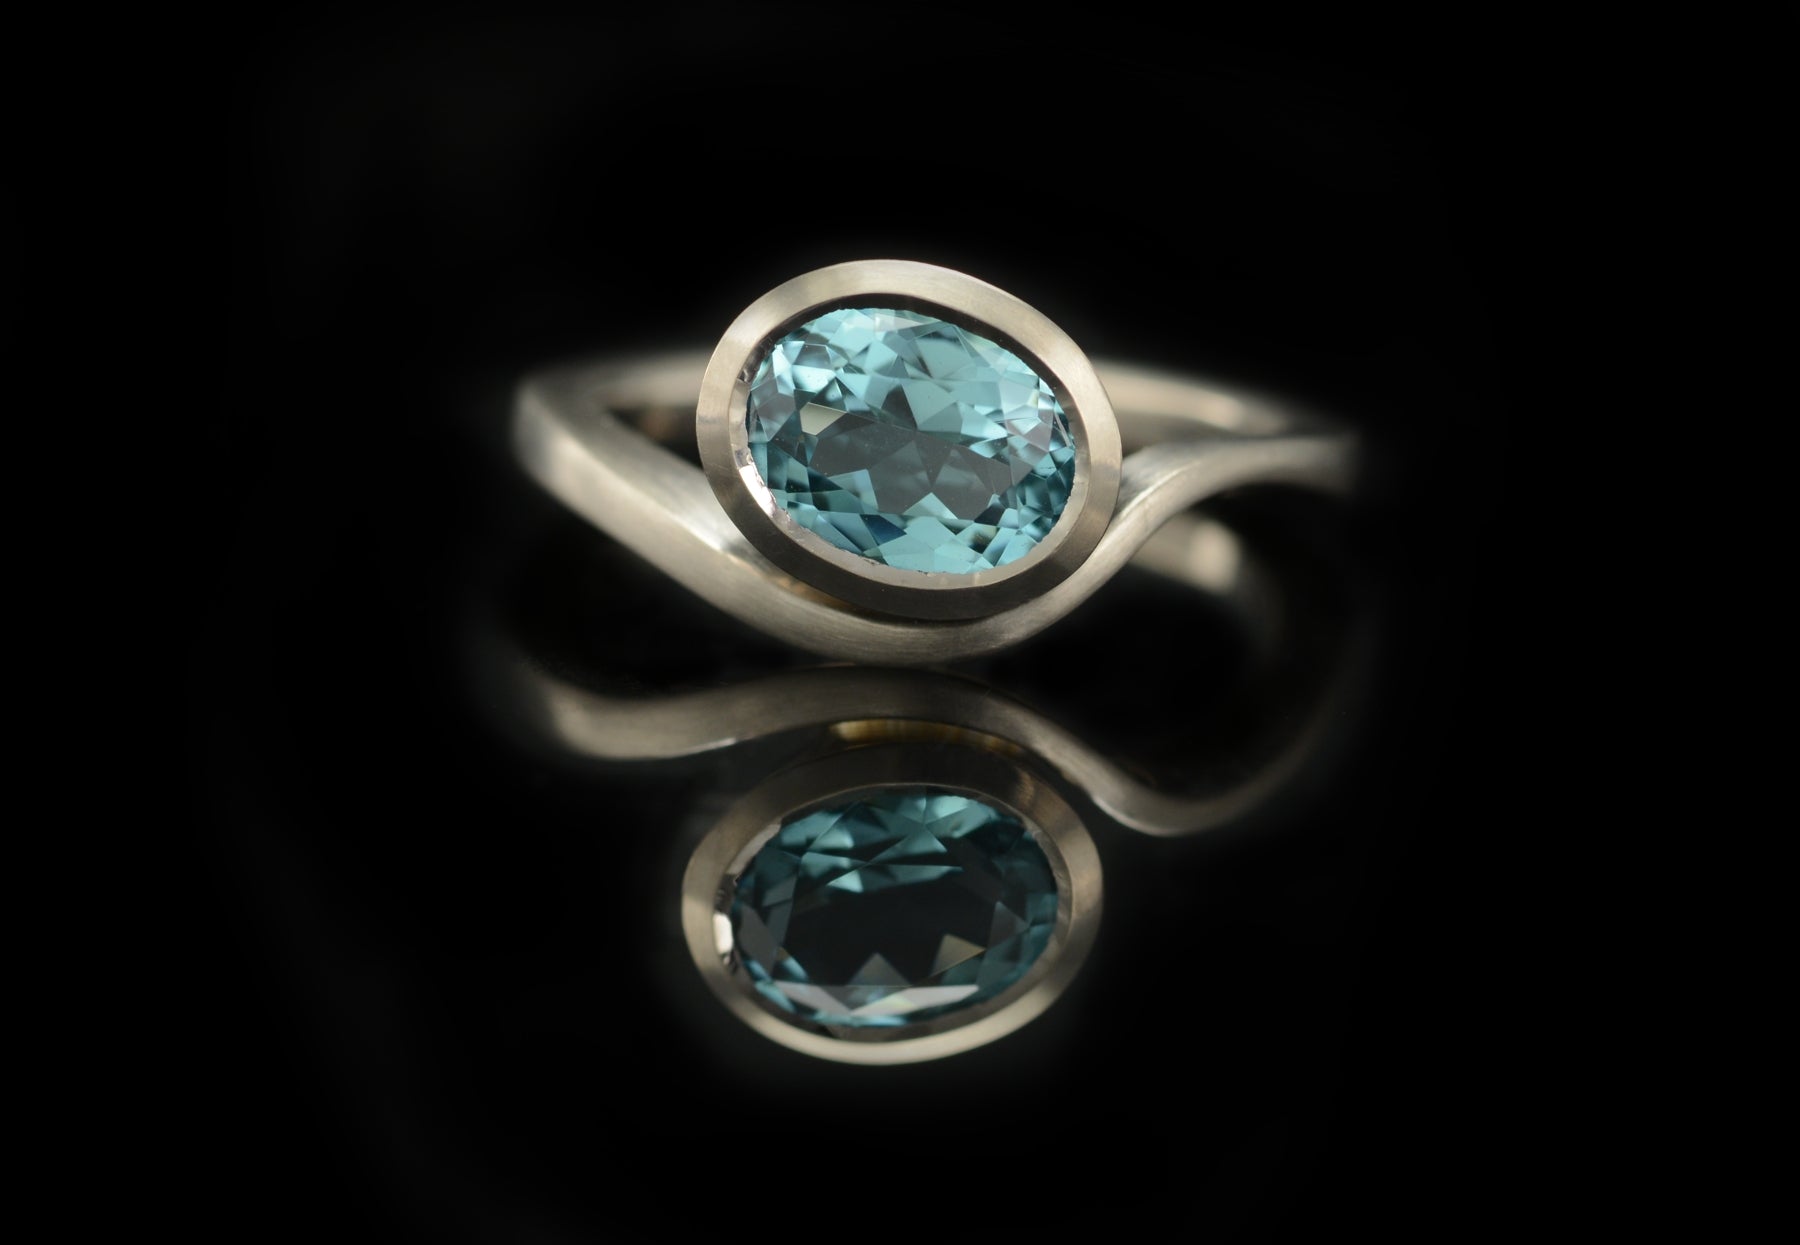 Colour Stone Rings Archives - Caliber Jewellery